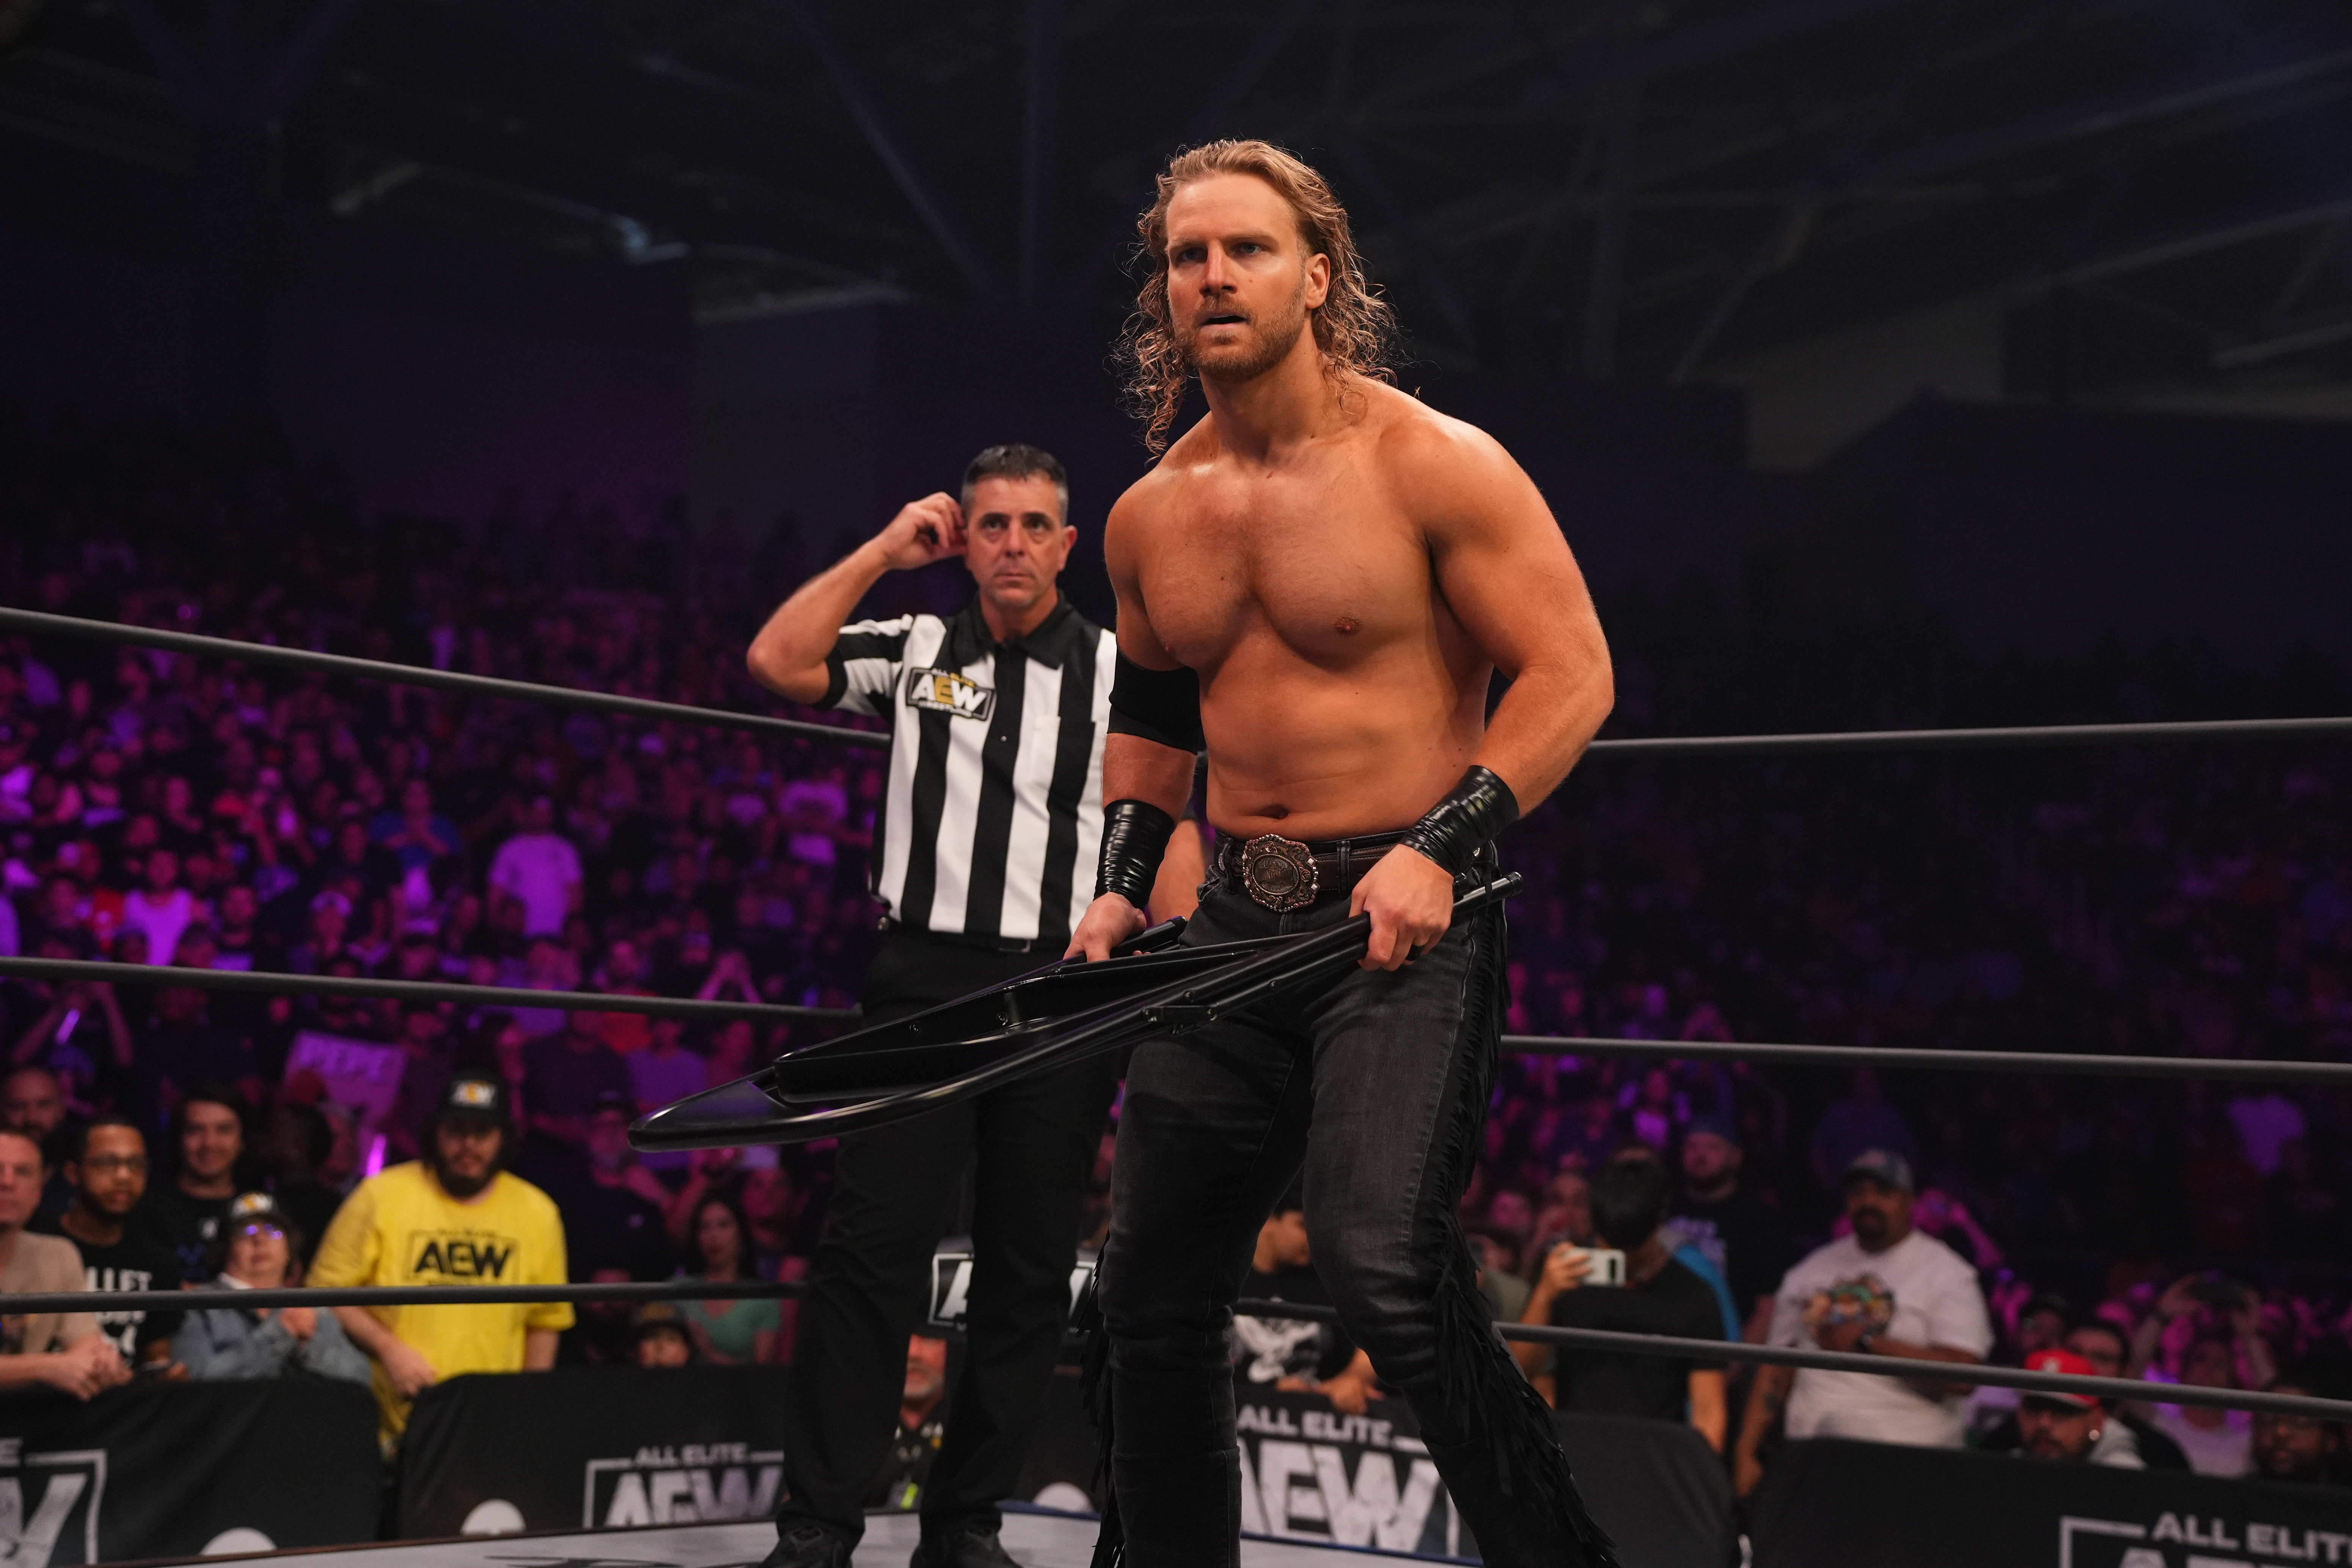 Report: ‘Hangman’ Adam Page, AEW discussing contract extension